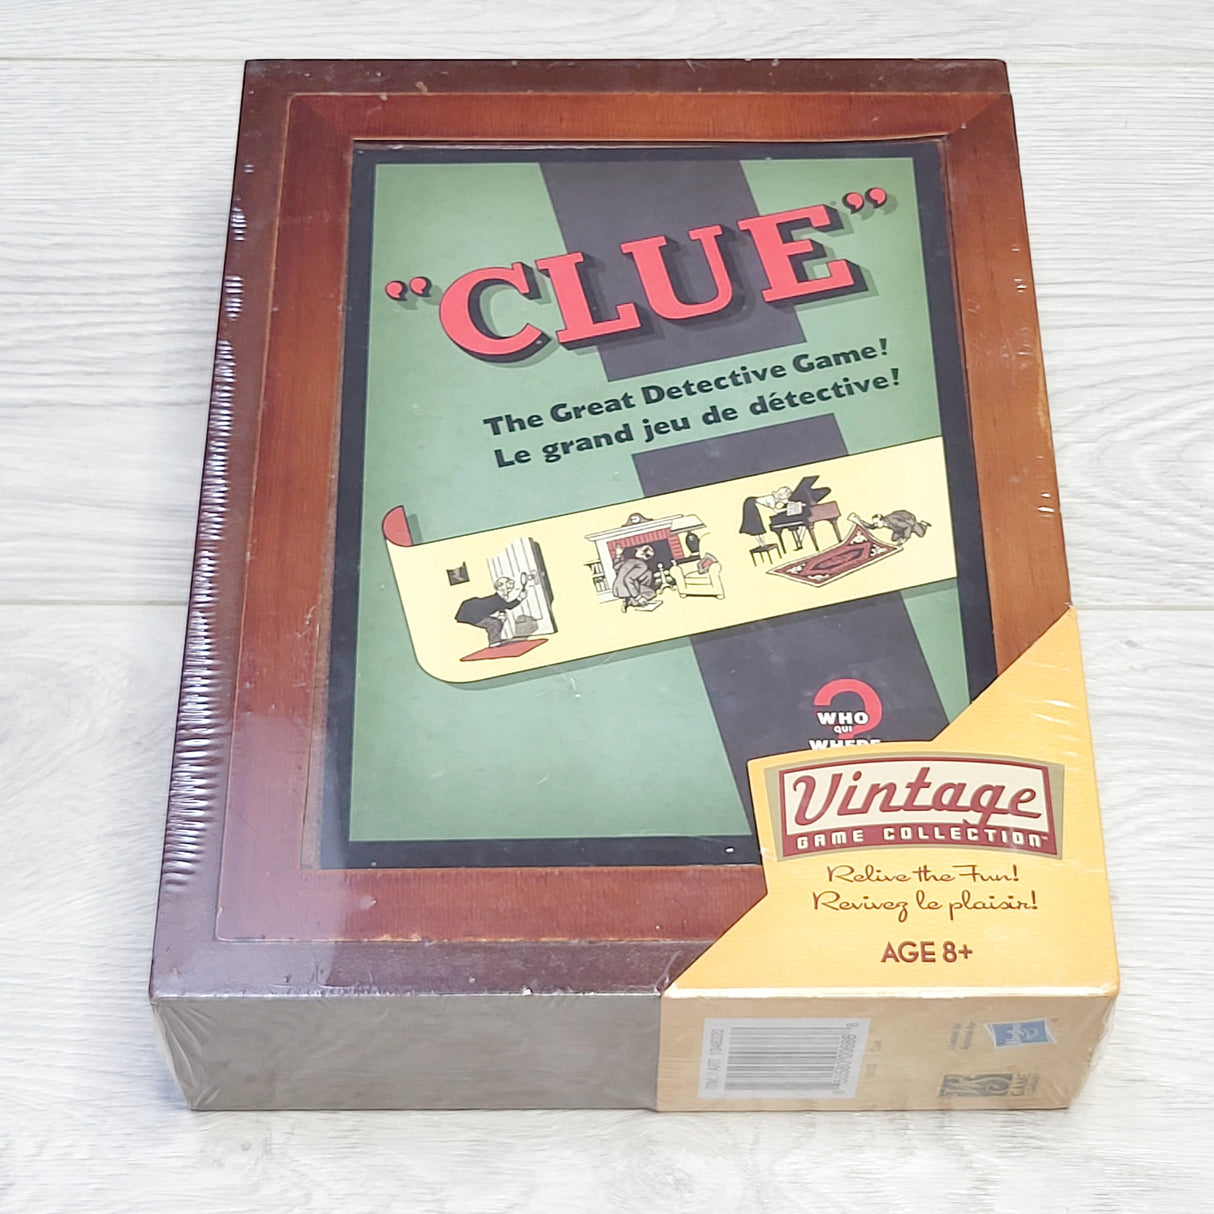 SPLT3 - NEW - 2018 CLUE Vintage Game Collection Edition